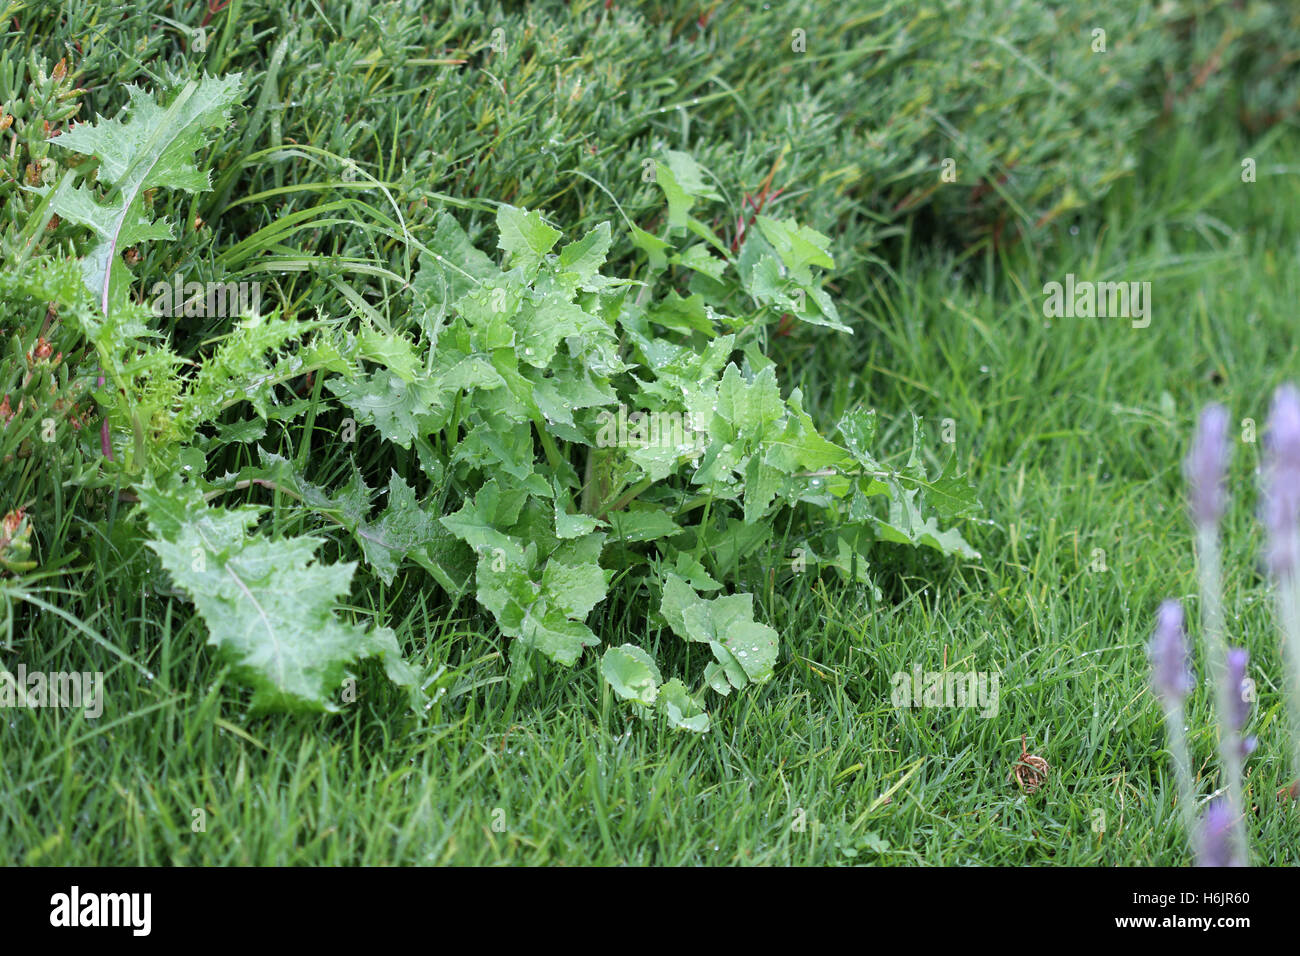 Sonchus oleraceus or also known as Sow Thistle growing near the grass Stock Photo